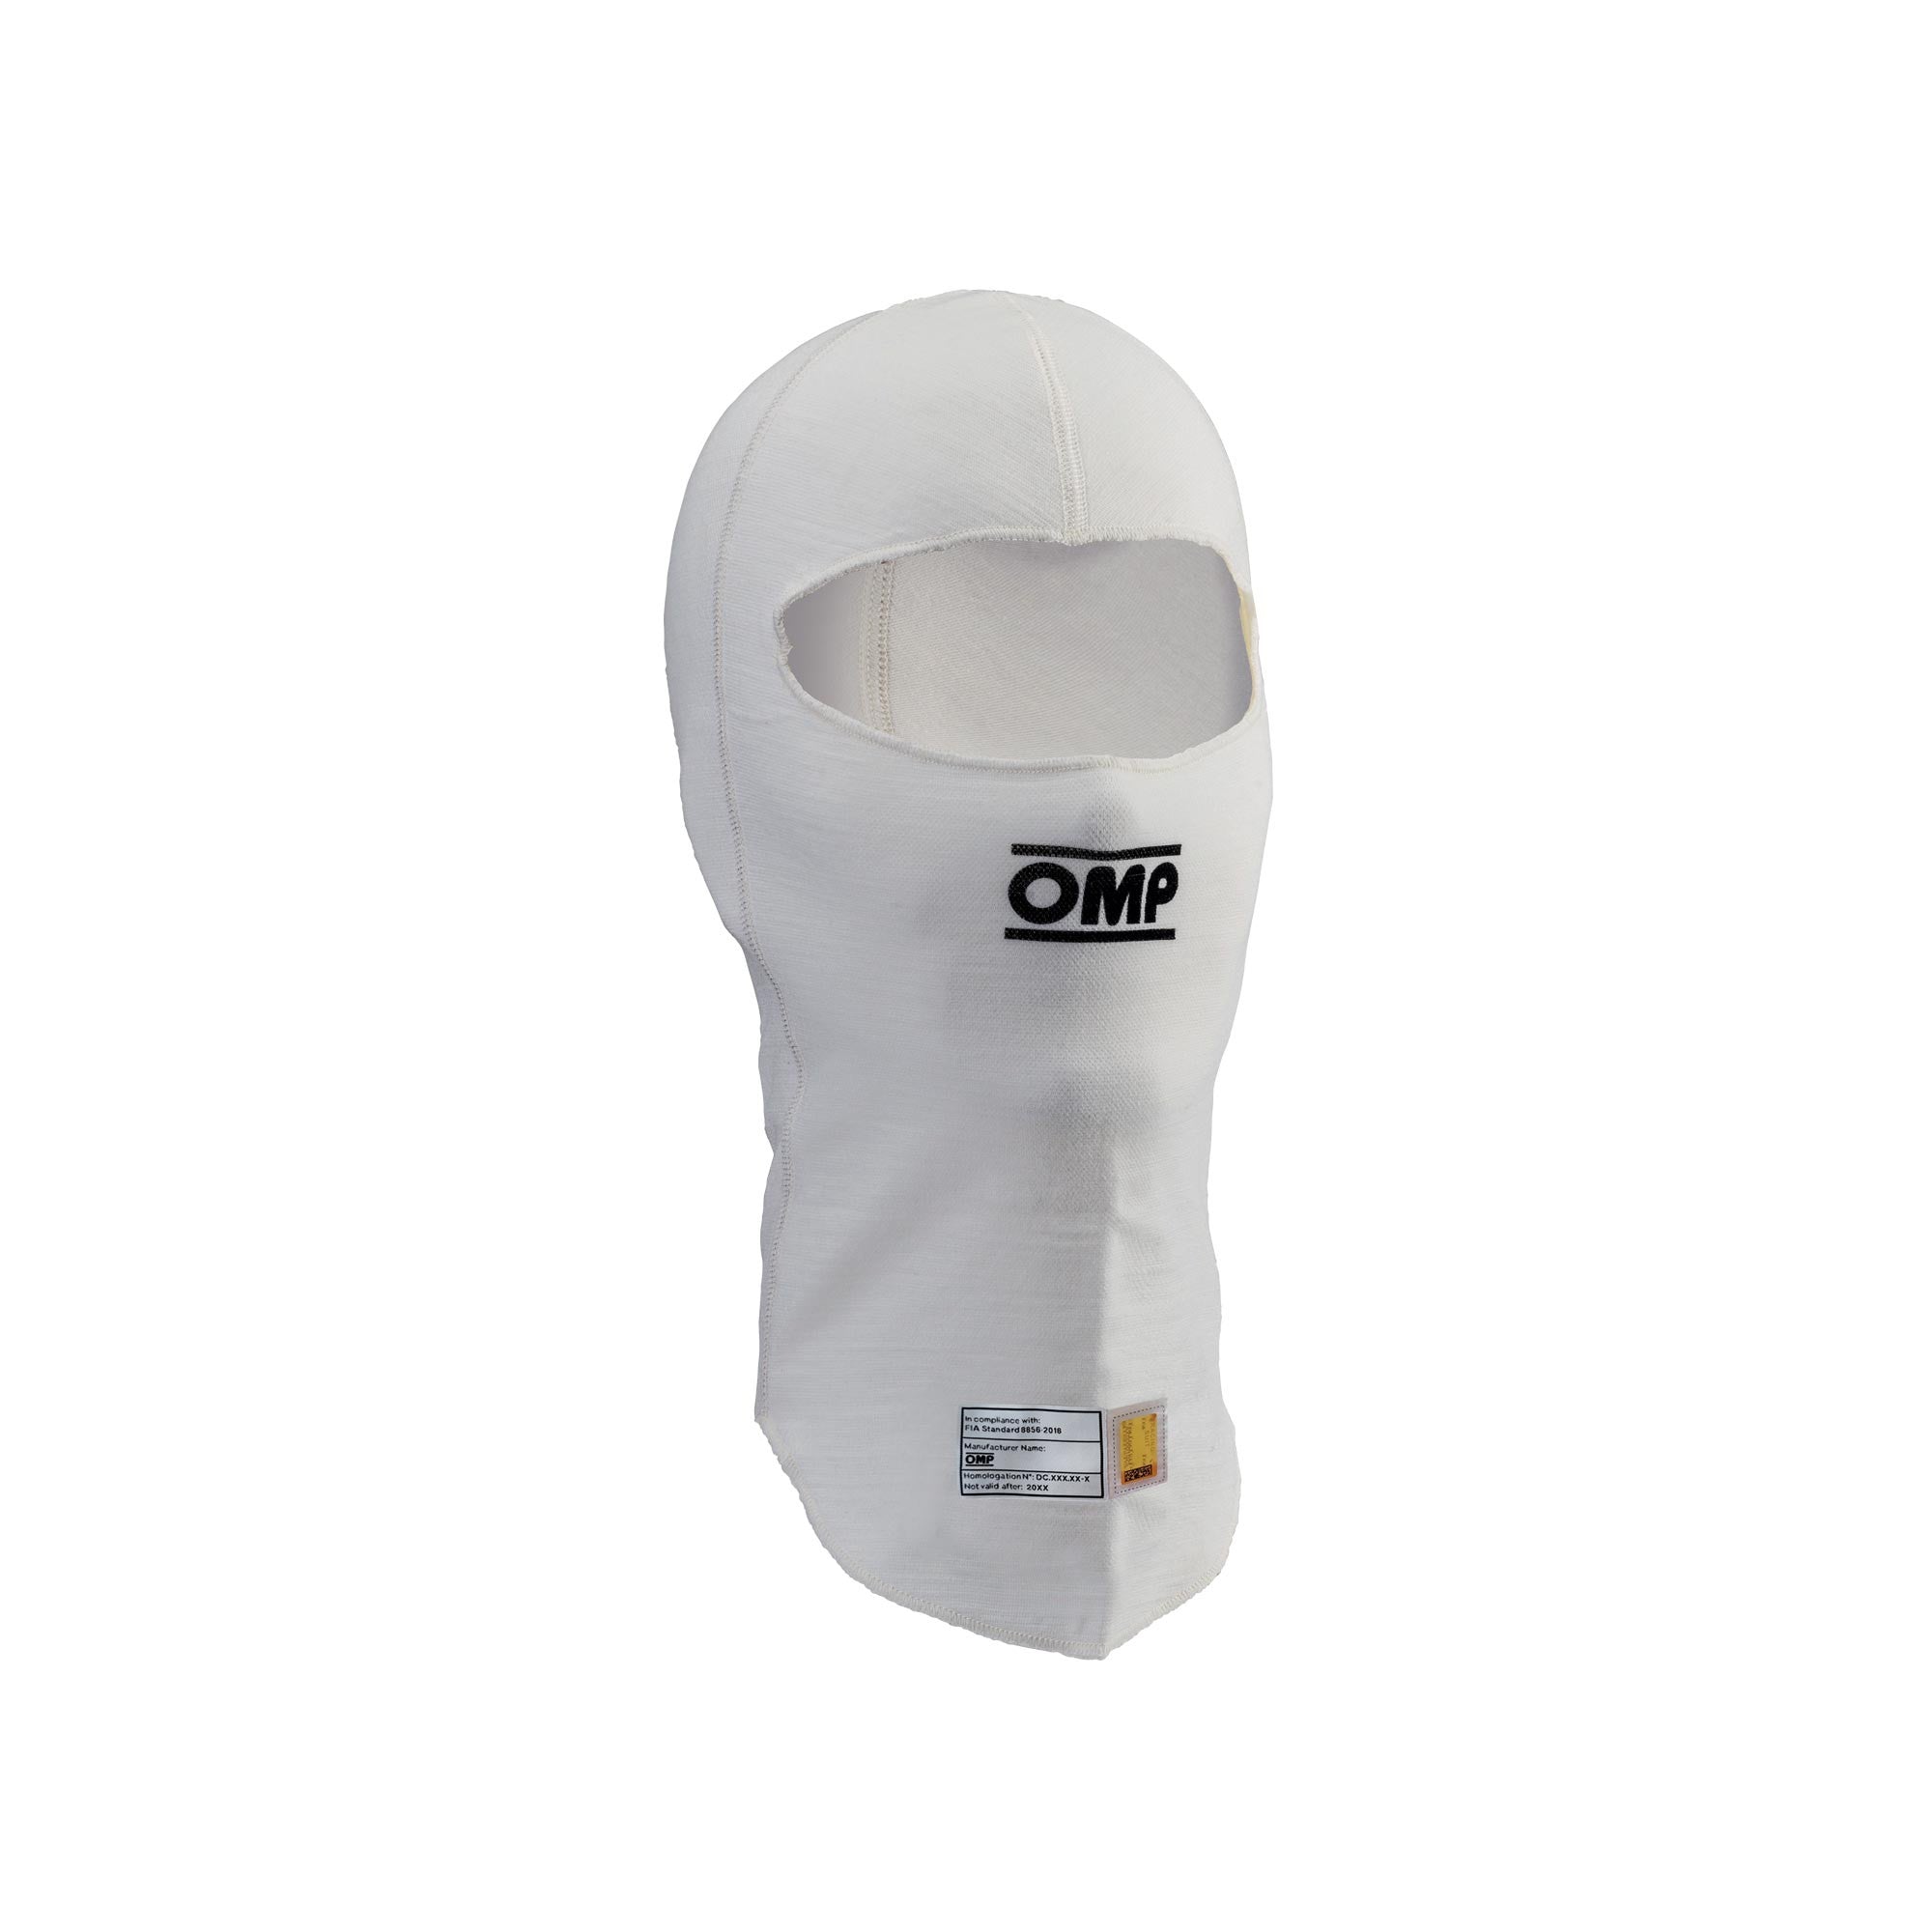 OMP NOMEX BALACLAVA ONE EVO - Paragon Competition Racing Equipment & Racing Safety Supplier